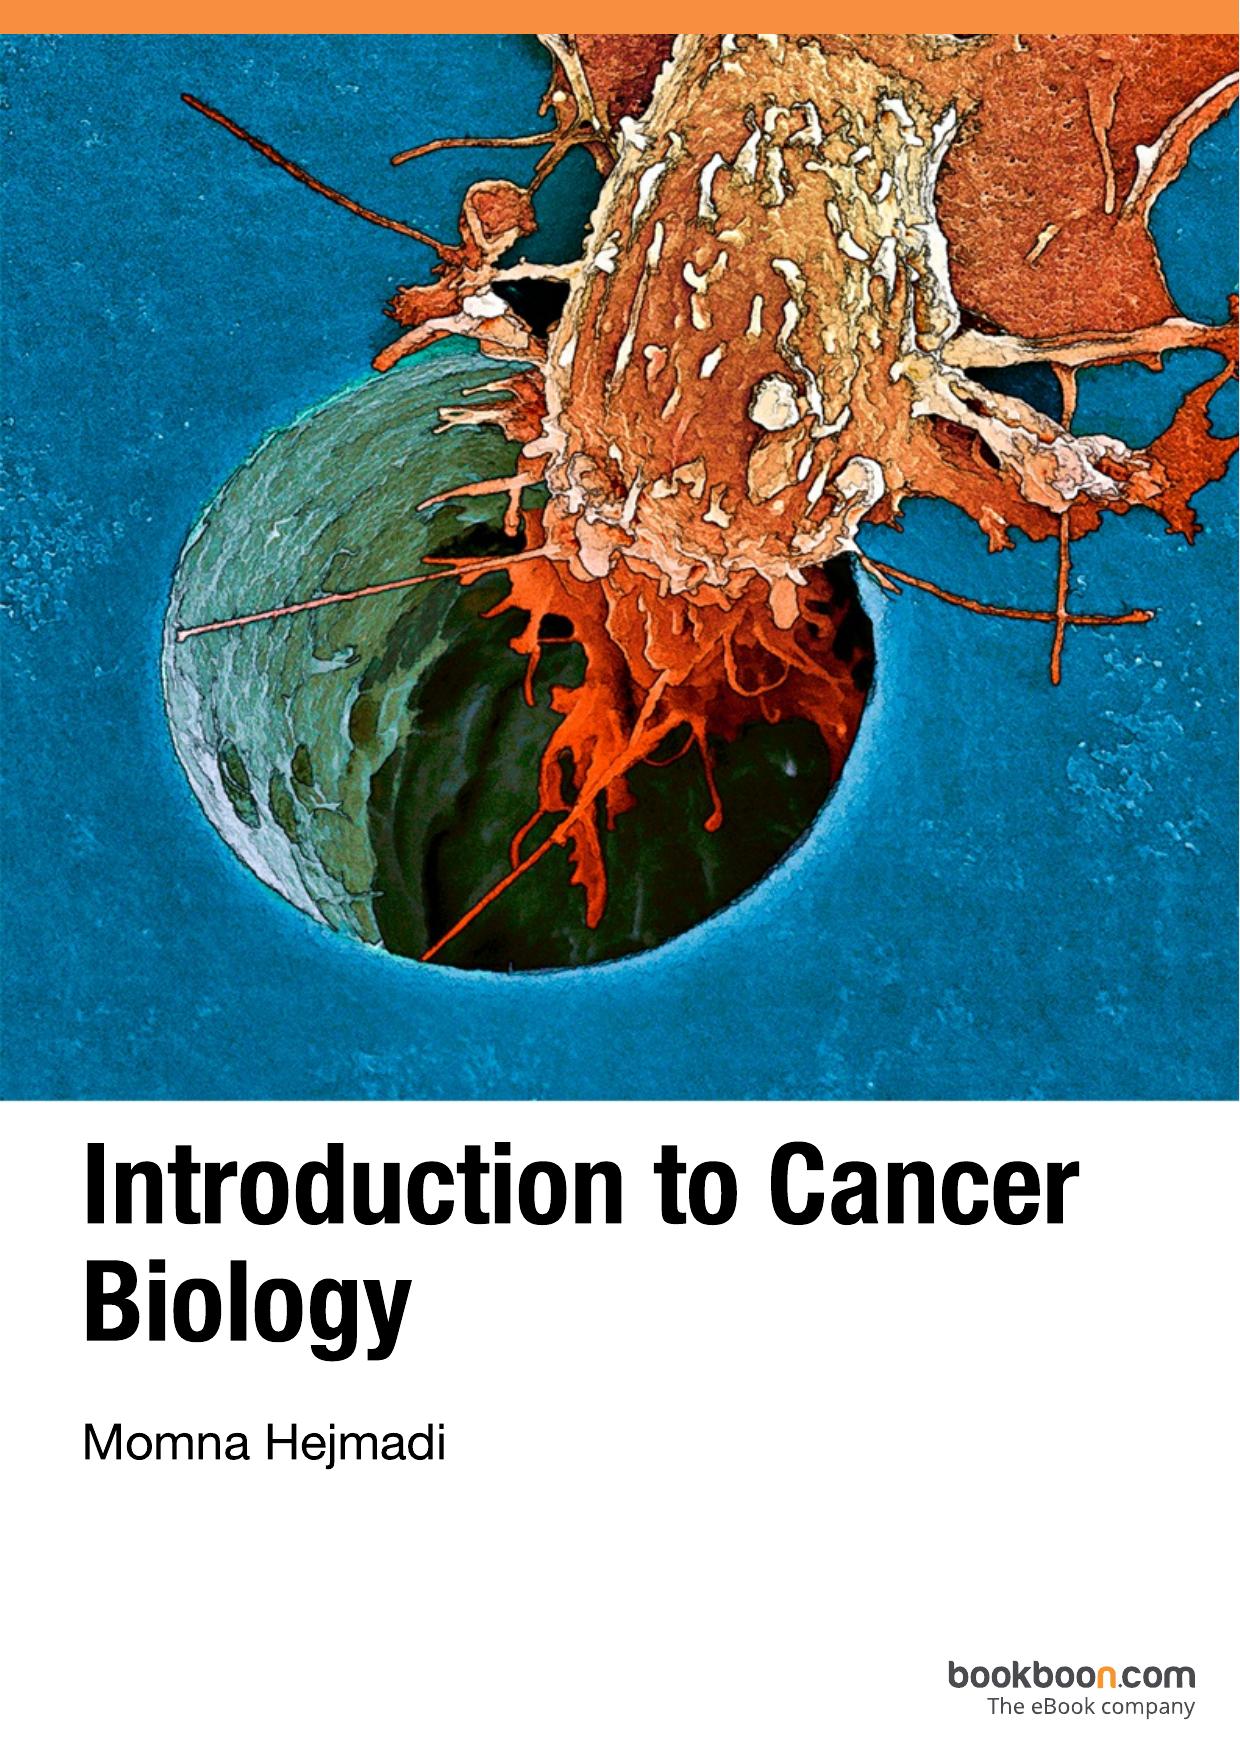 introduction-to-cancer-biology